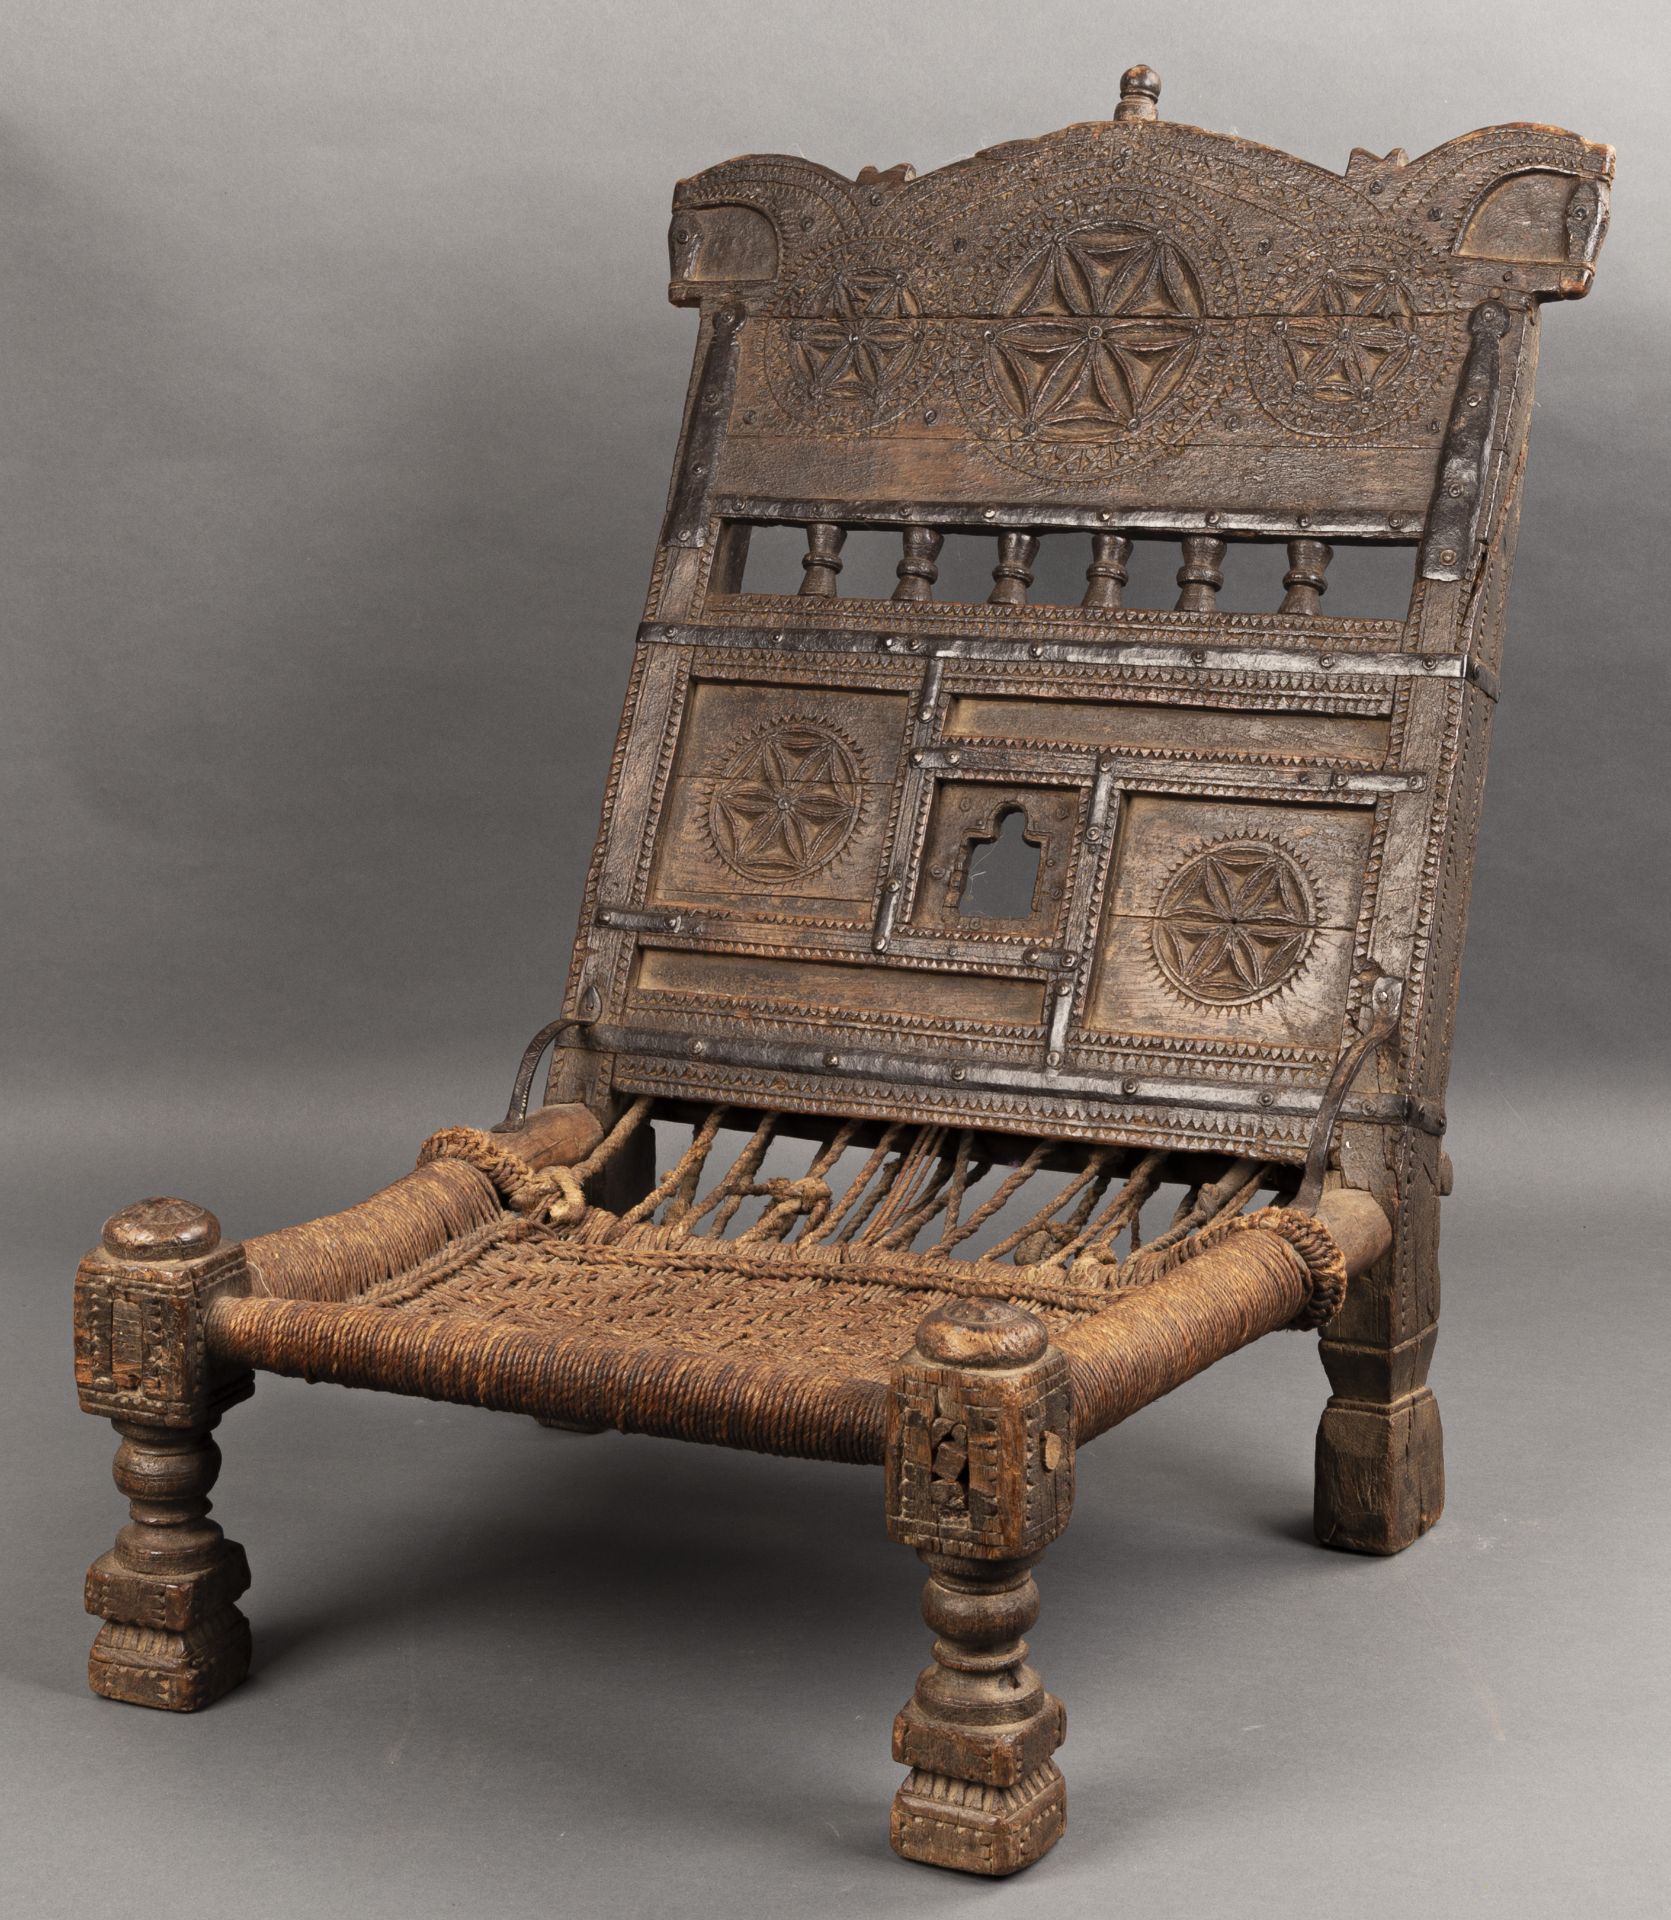 'Low Chair' od. 'indian rope chair', Indisch, um 1900